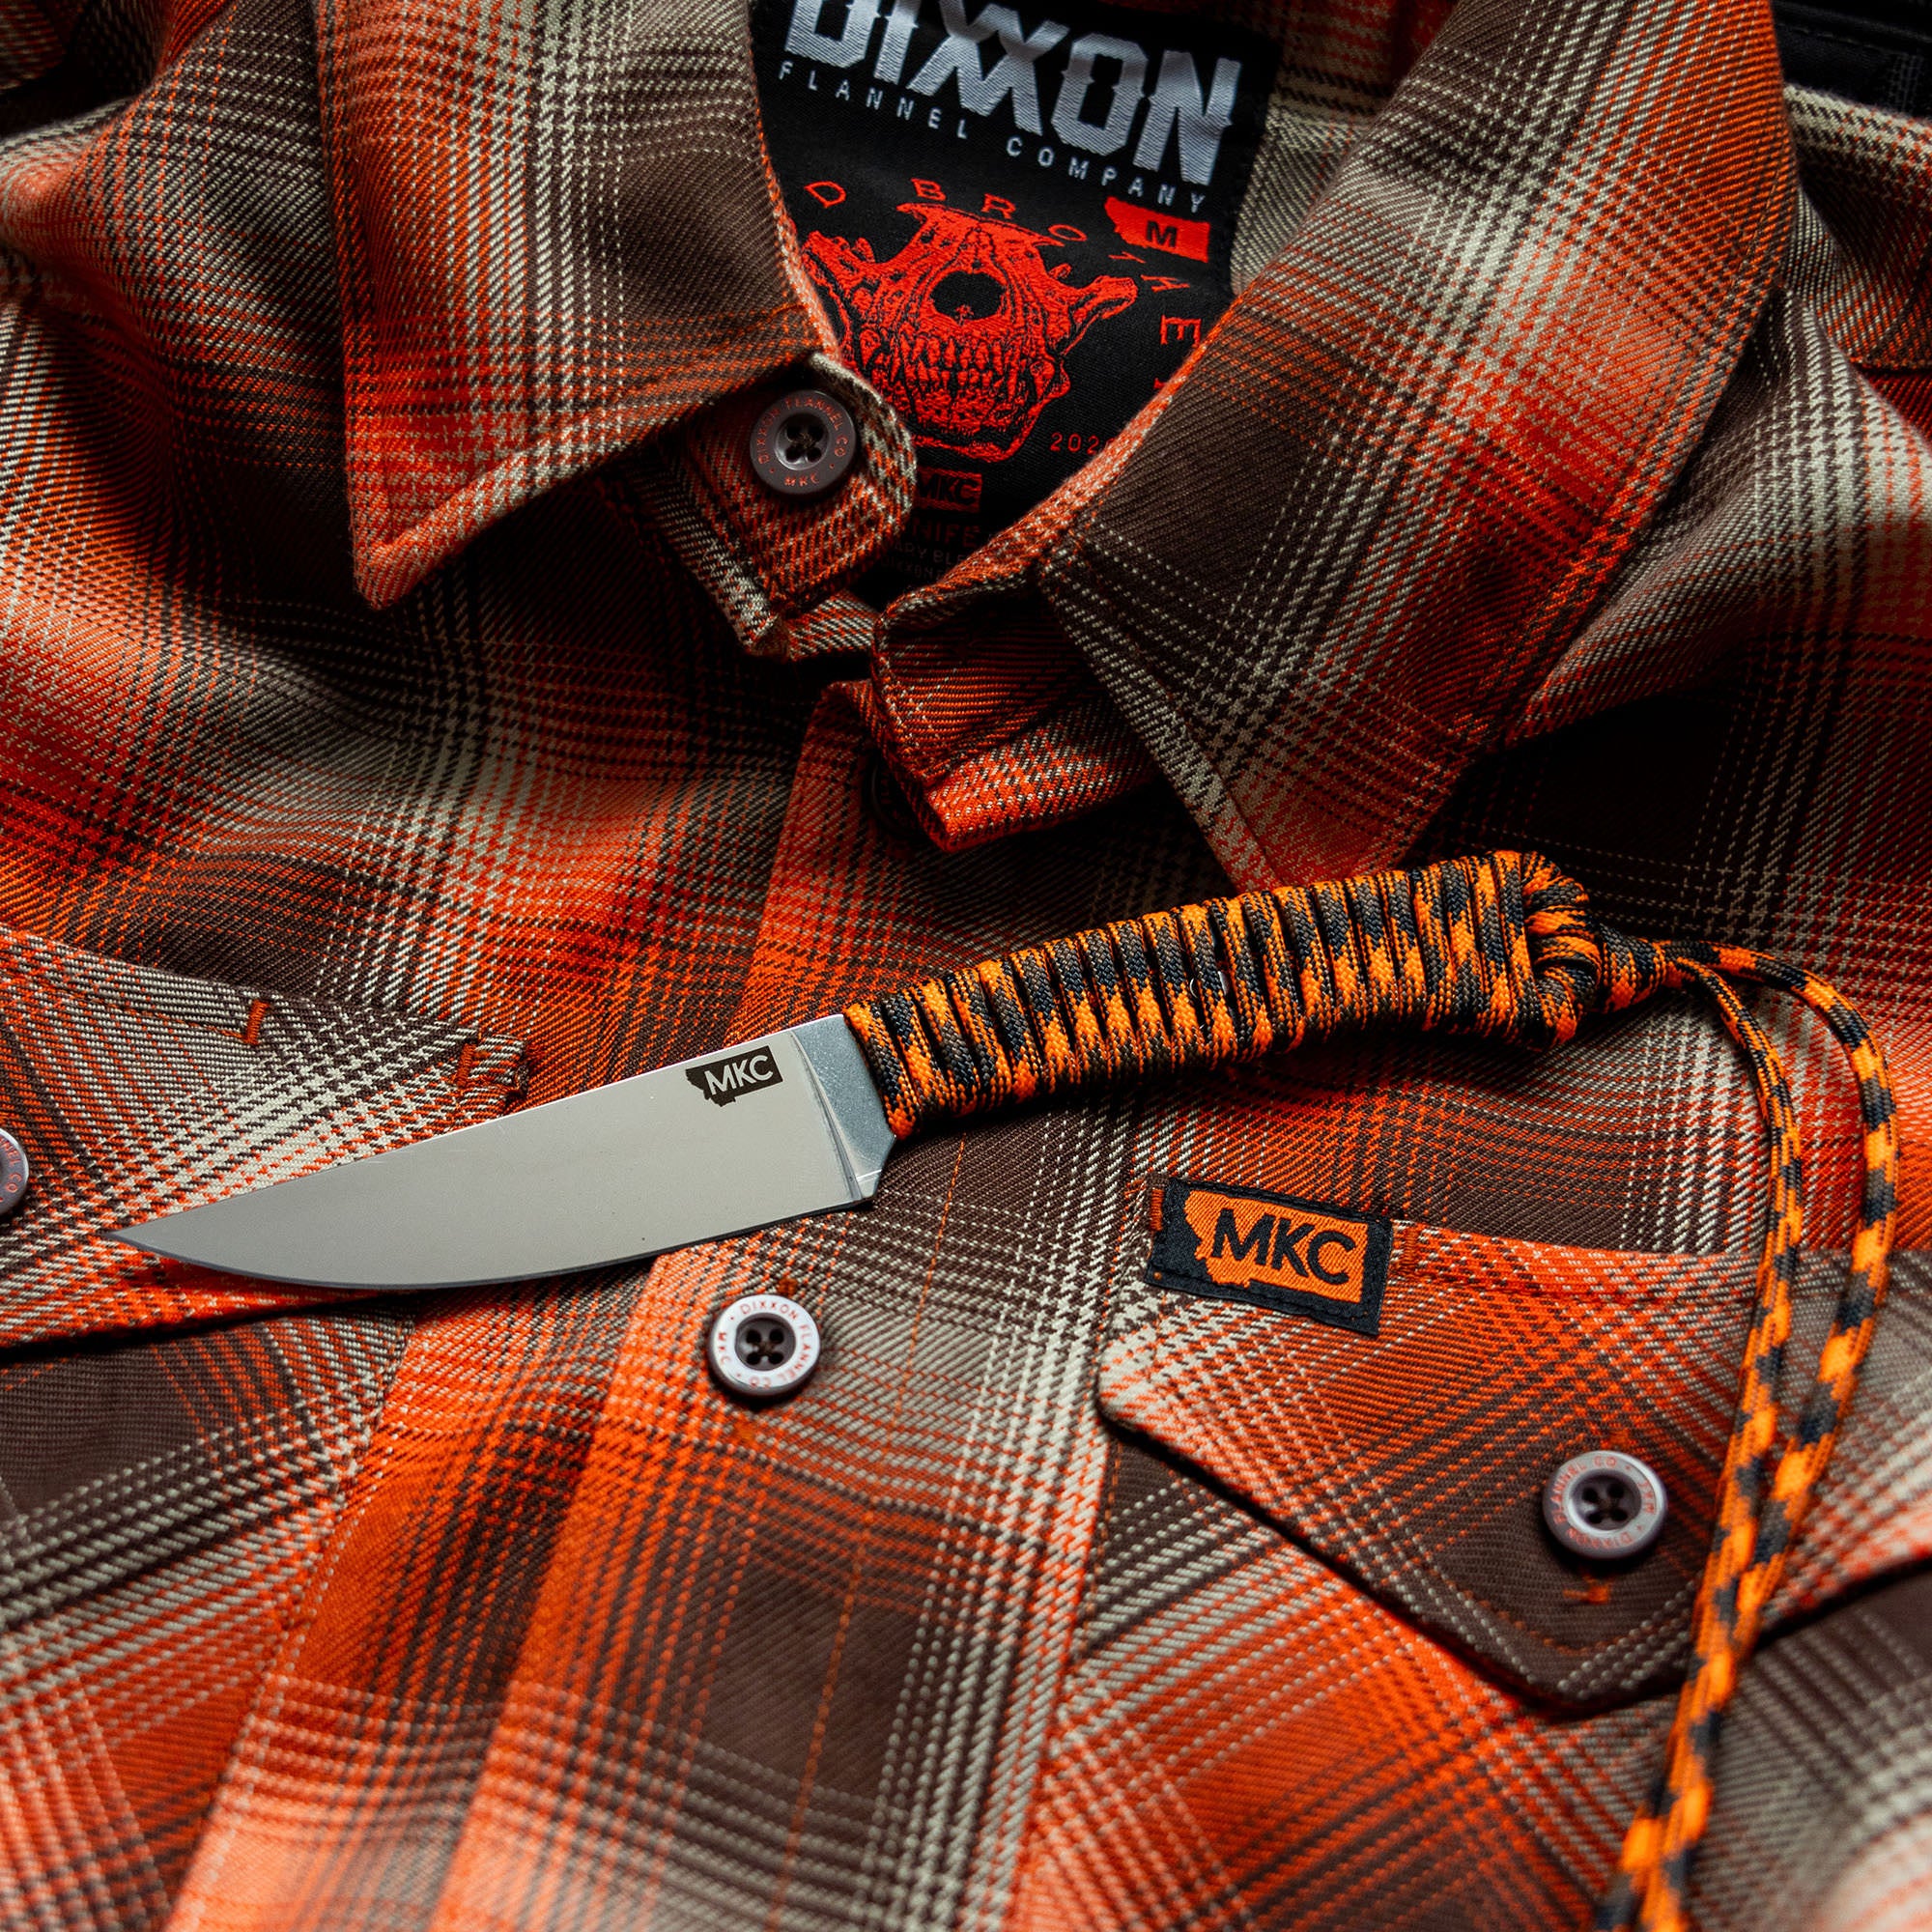 (SOLD OUT) MKC X DIXXON - LIMITED EDITION MAGNACUT SPEEDGOAT